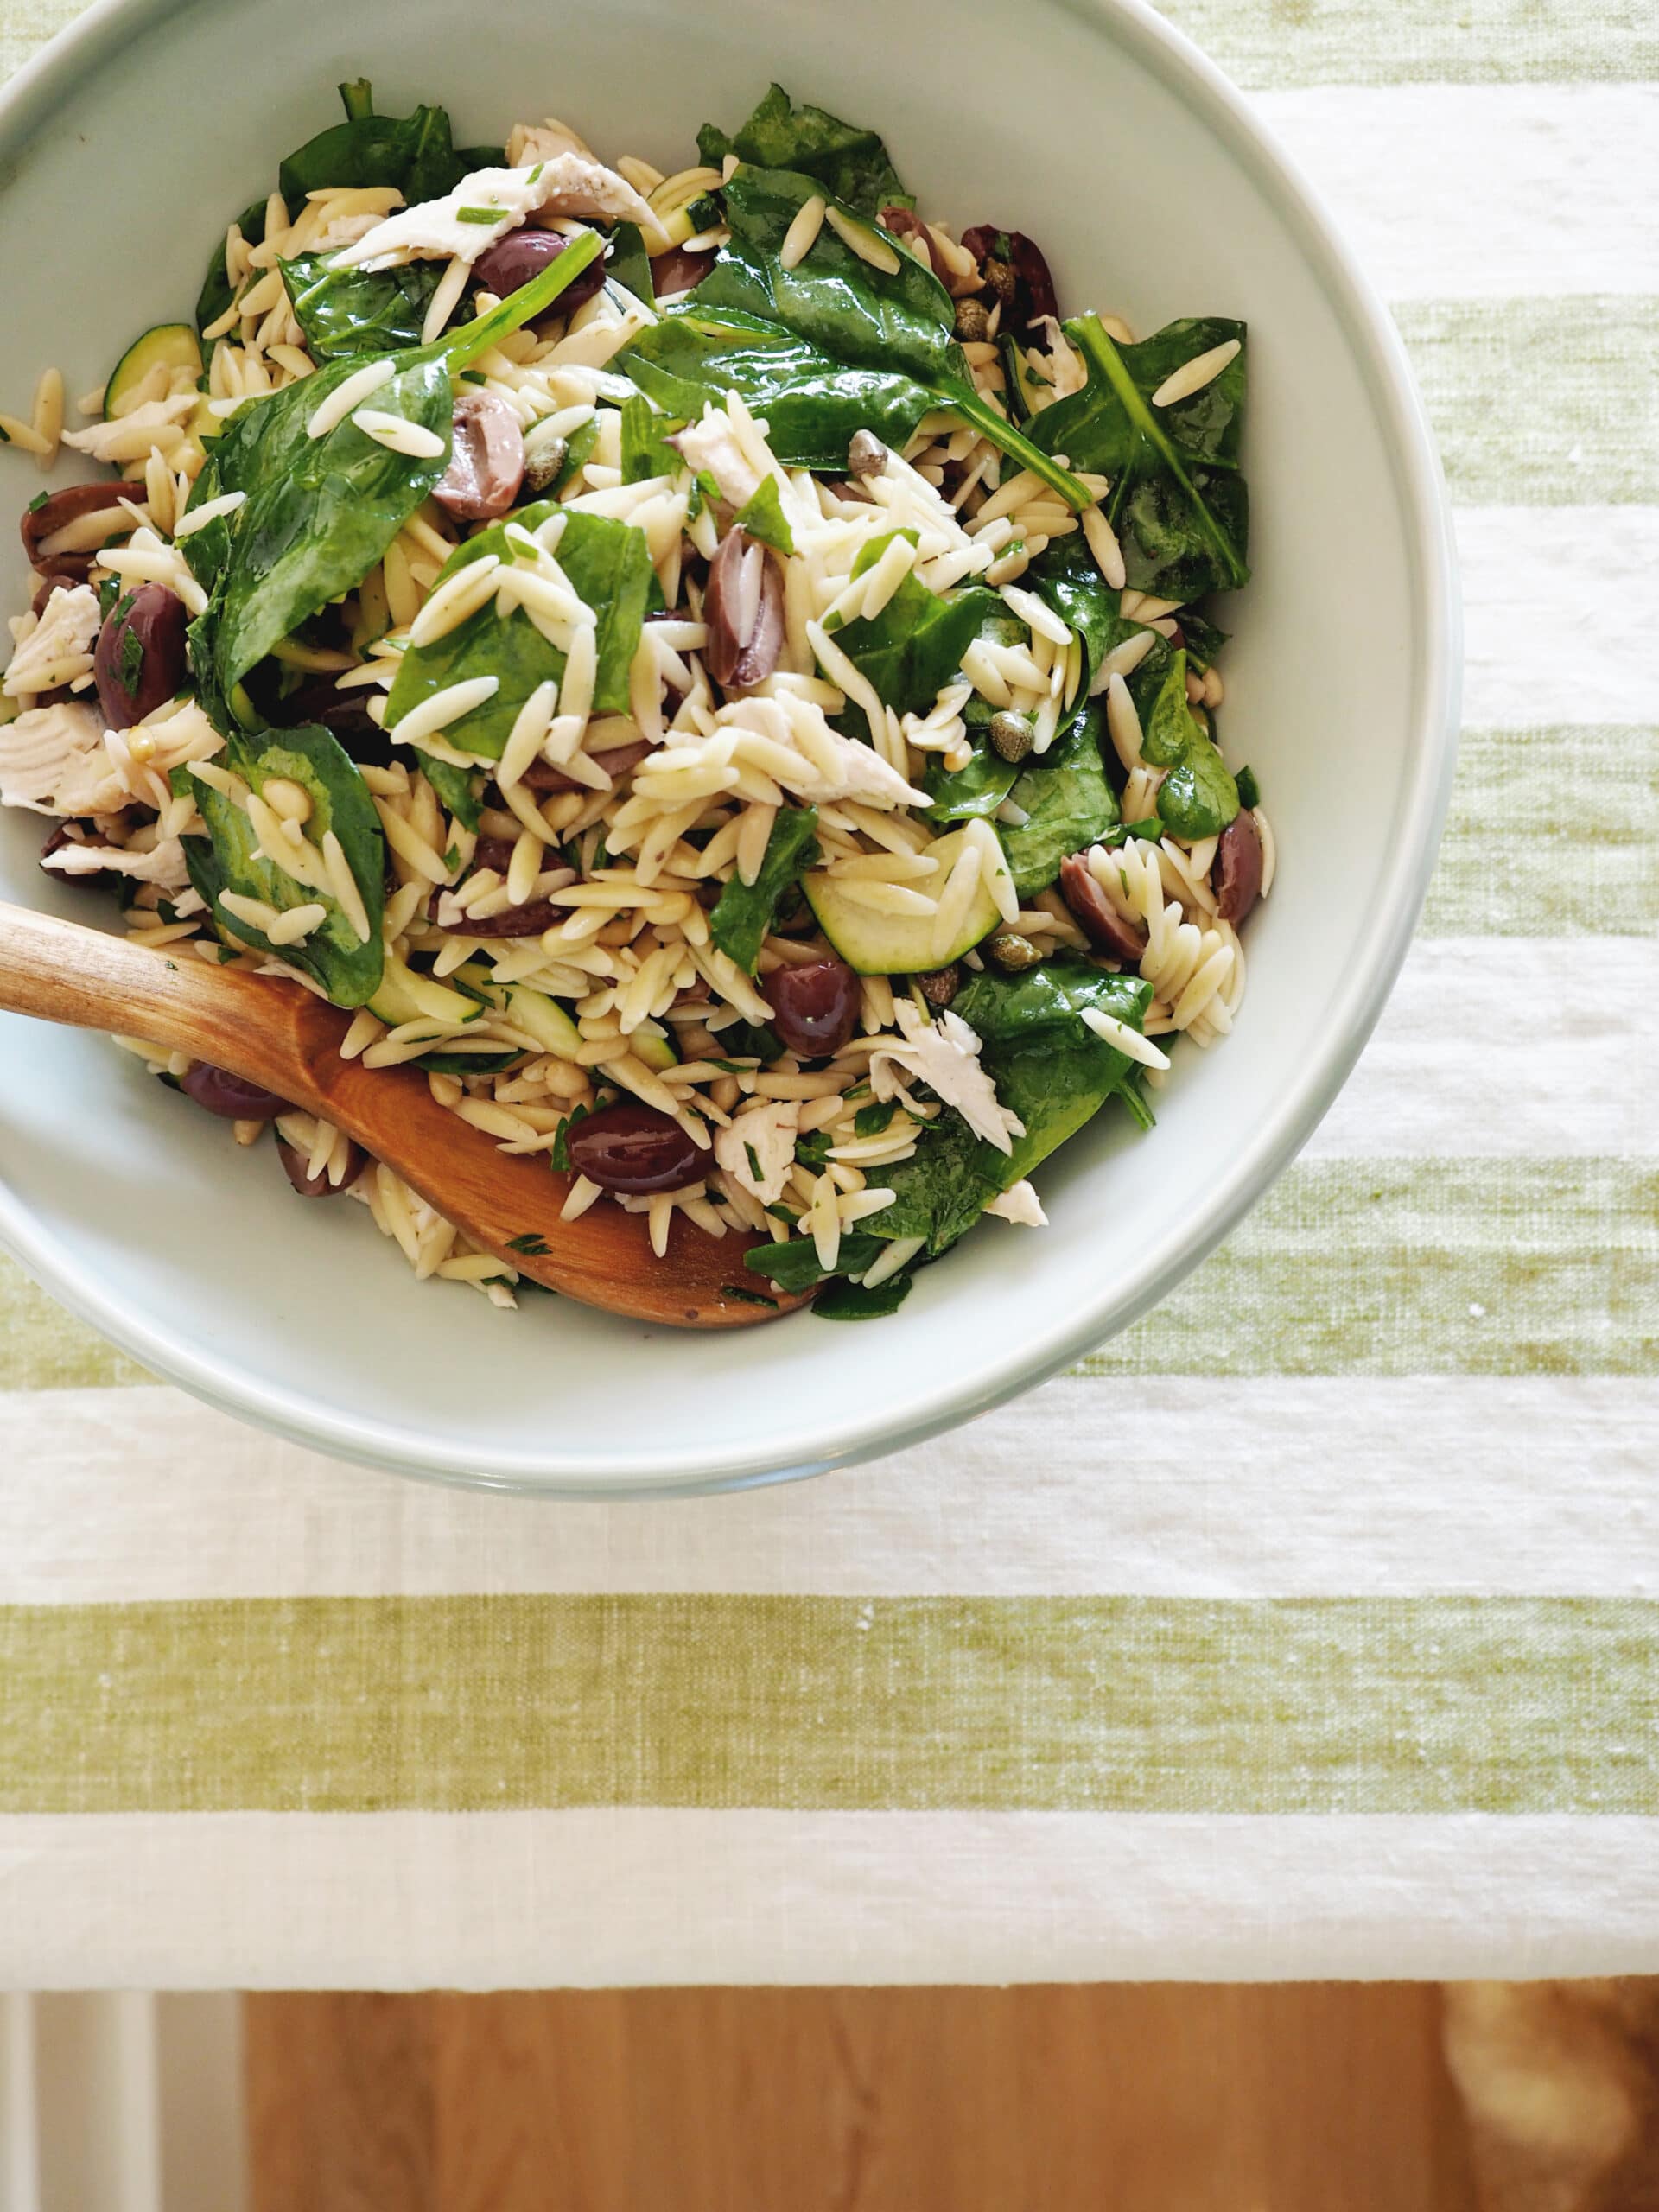 grilled chicken and orzo pasta salad recipe with spinach olives and pine nuts | coco kelley